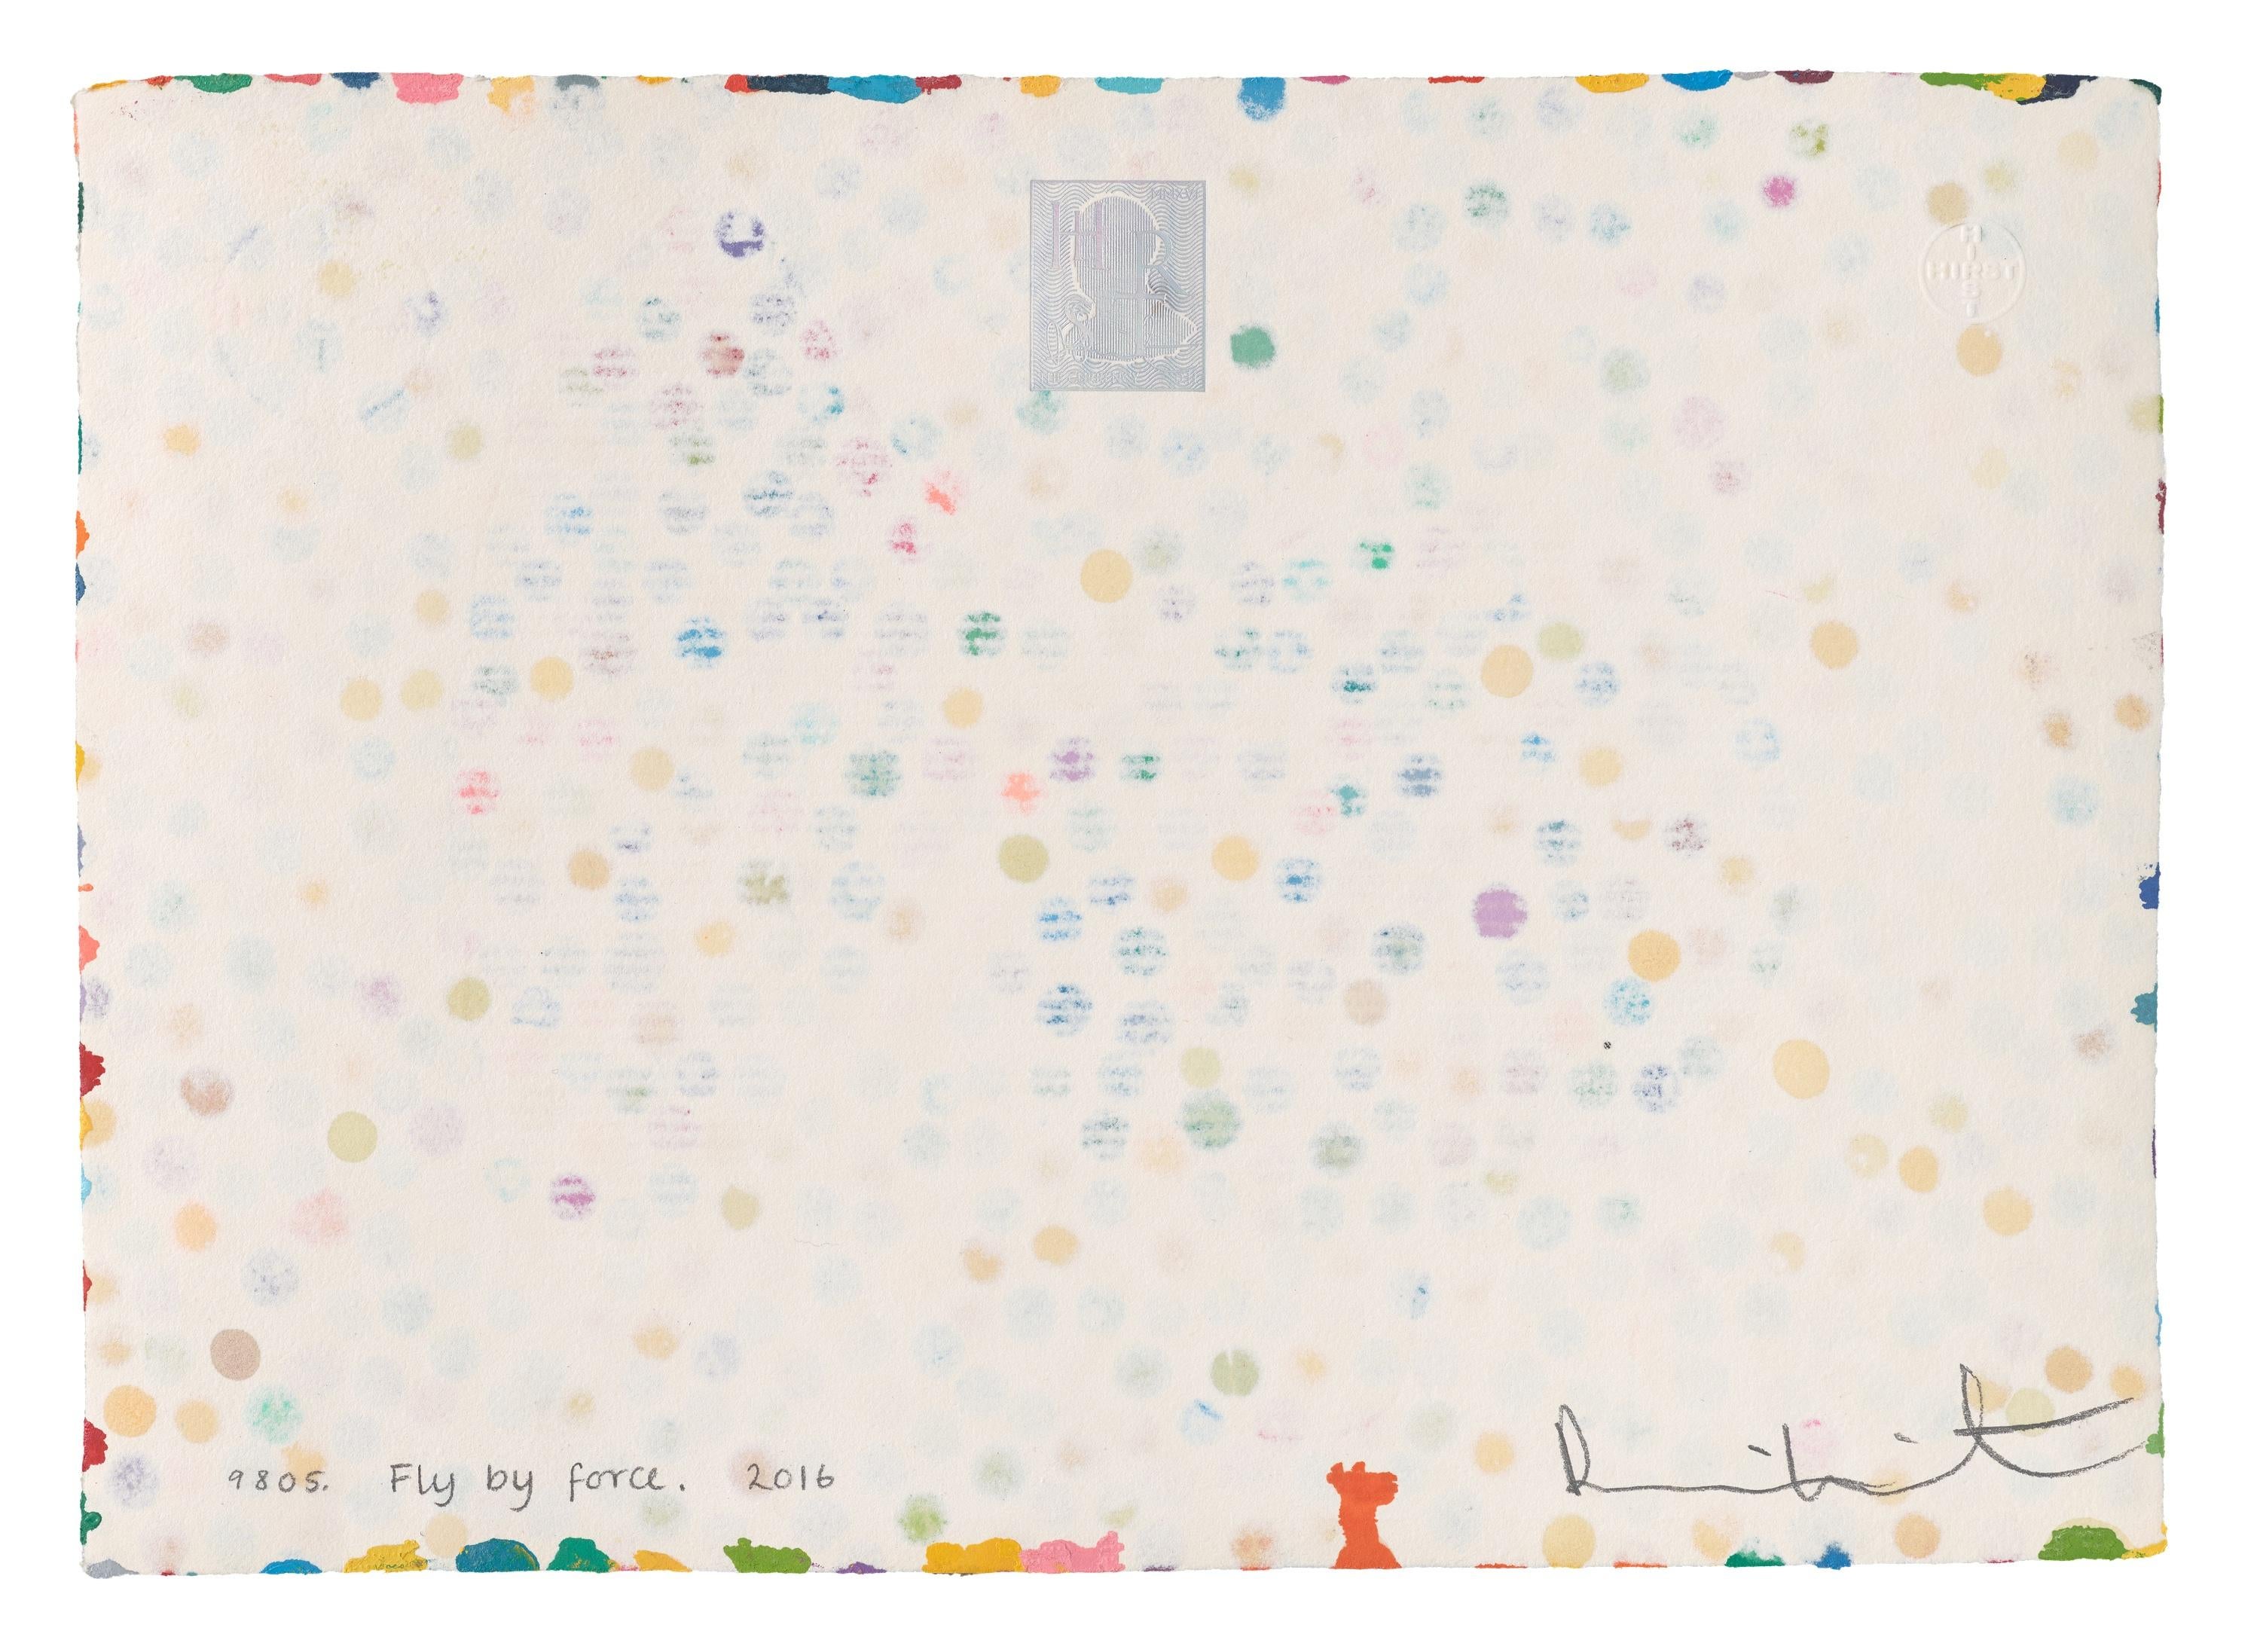 9805. Fly by force. (From The Currency). - Painting by Damien Hirst